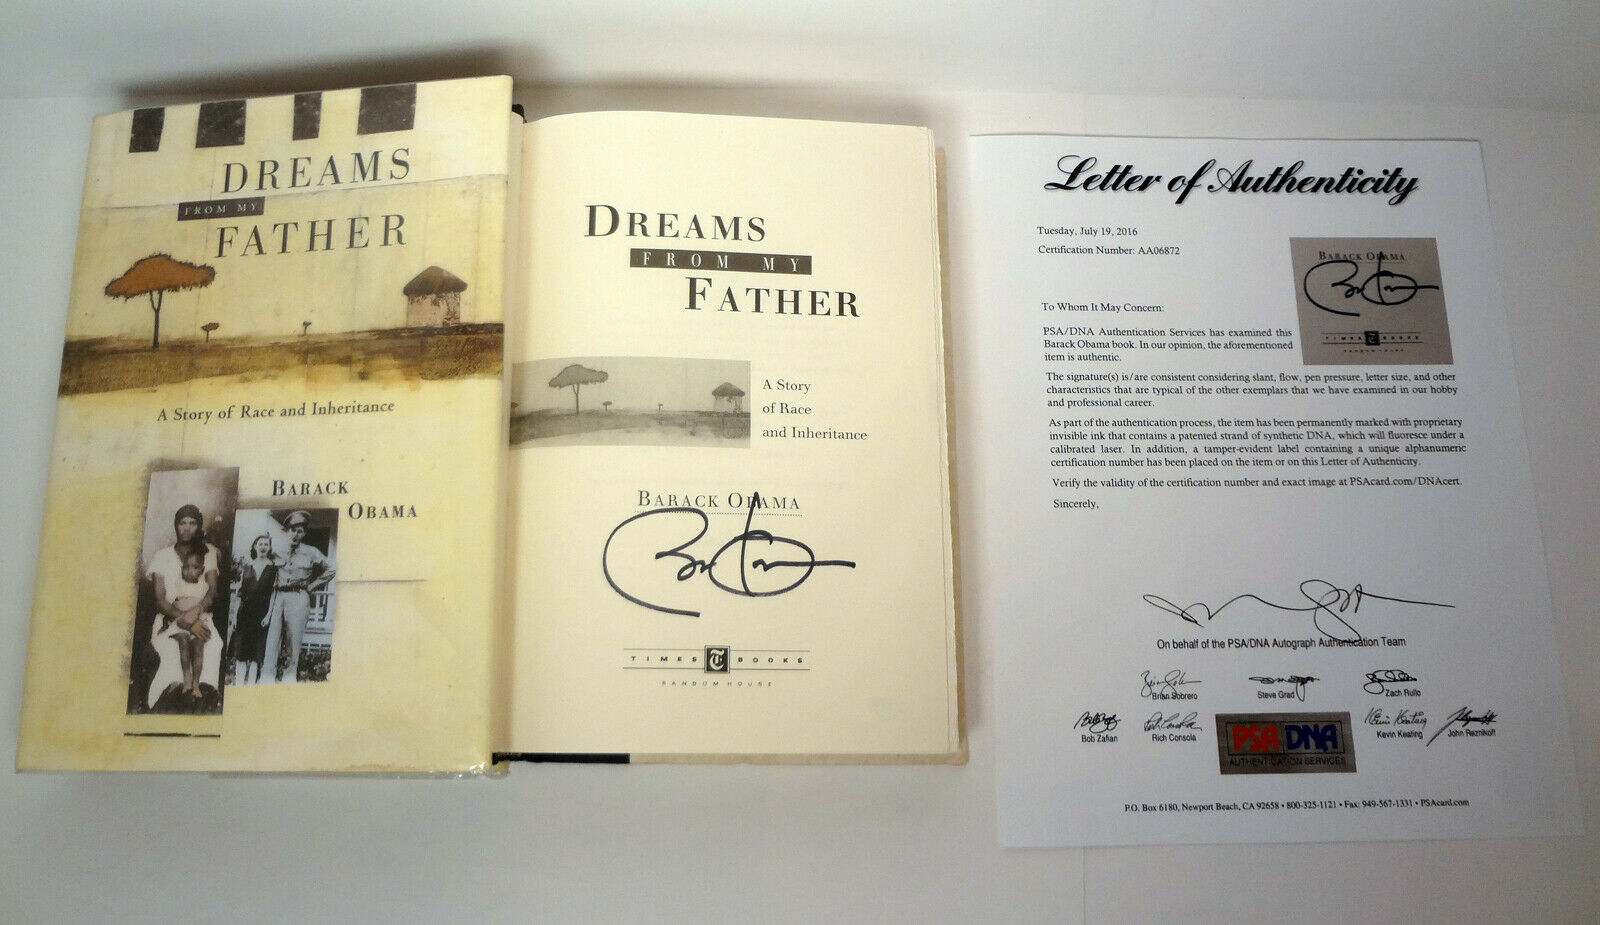 Sports　Dreams　Nicks　W/　Barack　–　COA　1st　Obama　PSA/DNA　Book　Signed　Edition　From　1995　Father　My　Autographs